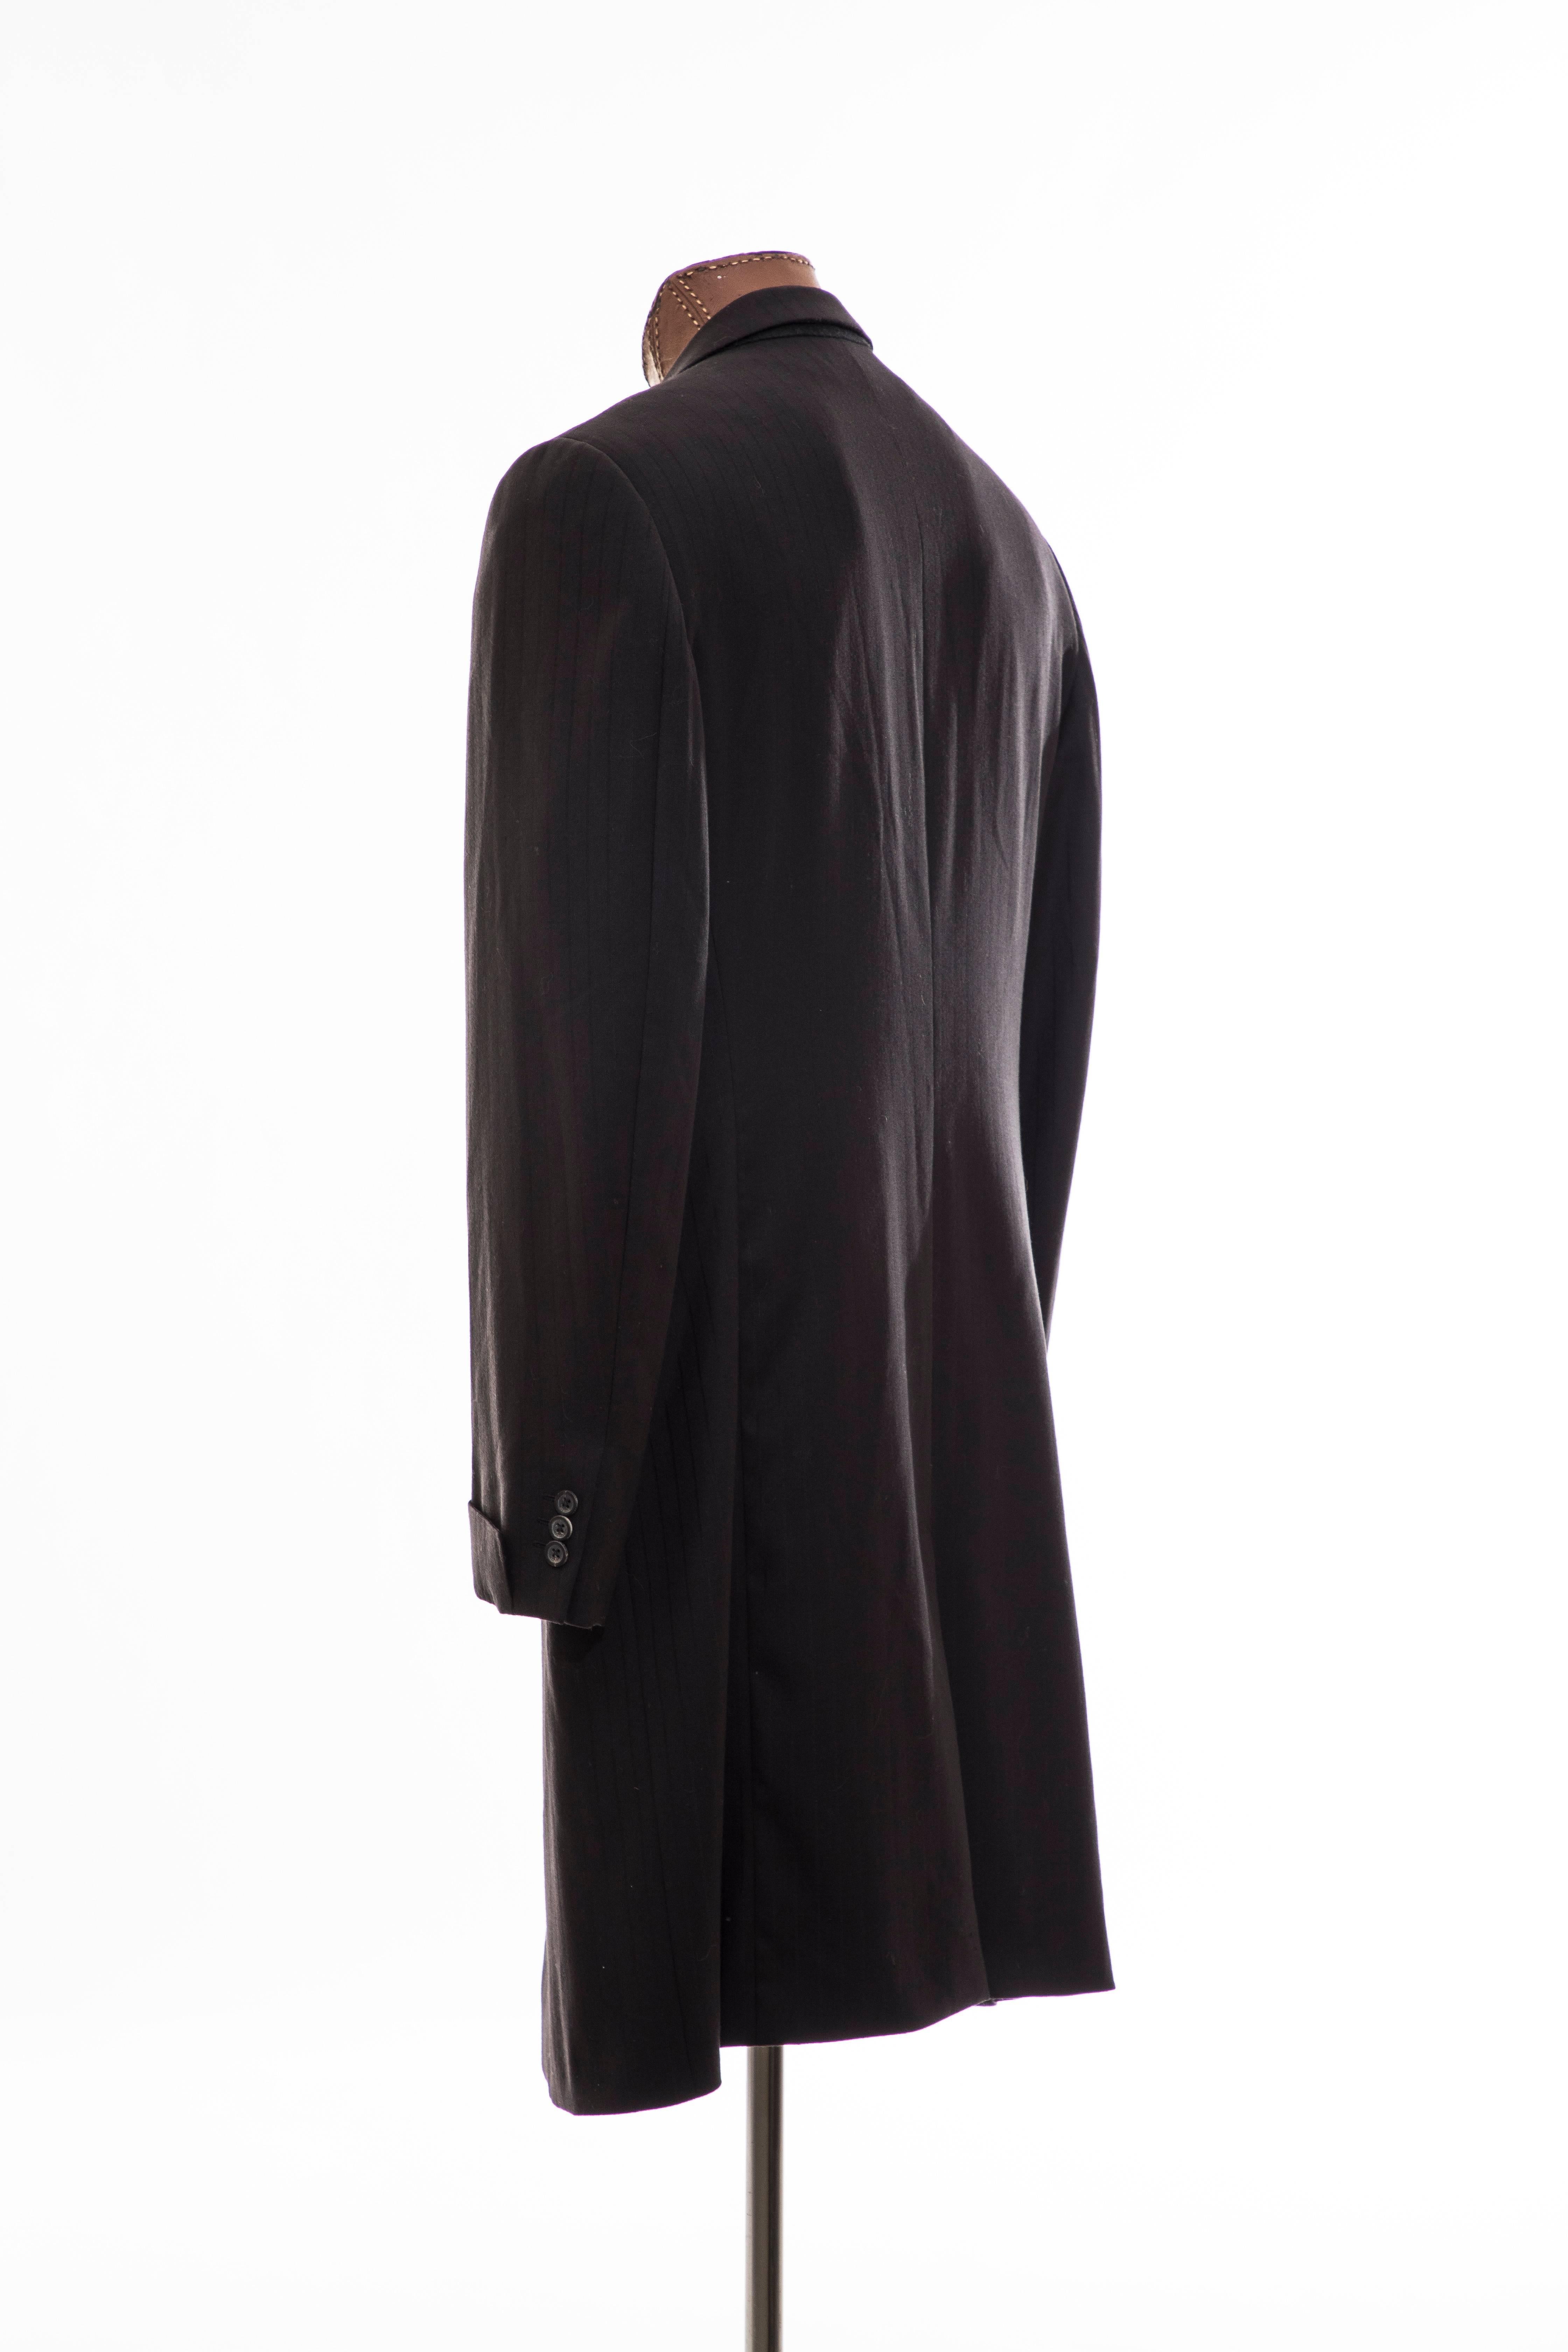 Gianni Versace Couture Men's Black Pinstriped Wool Overcoat, Circa 1990's For Sale 1